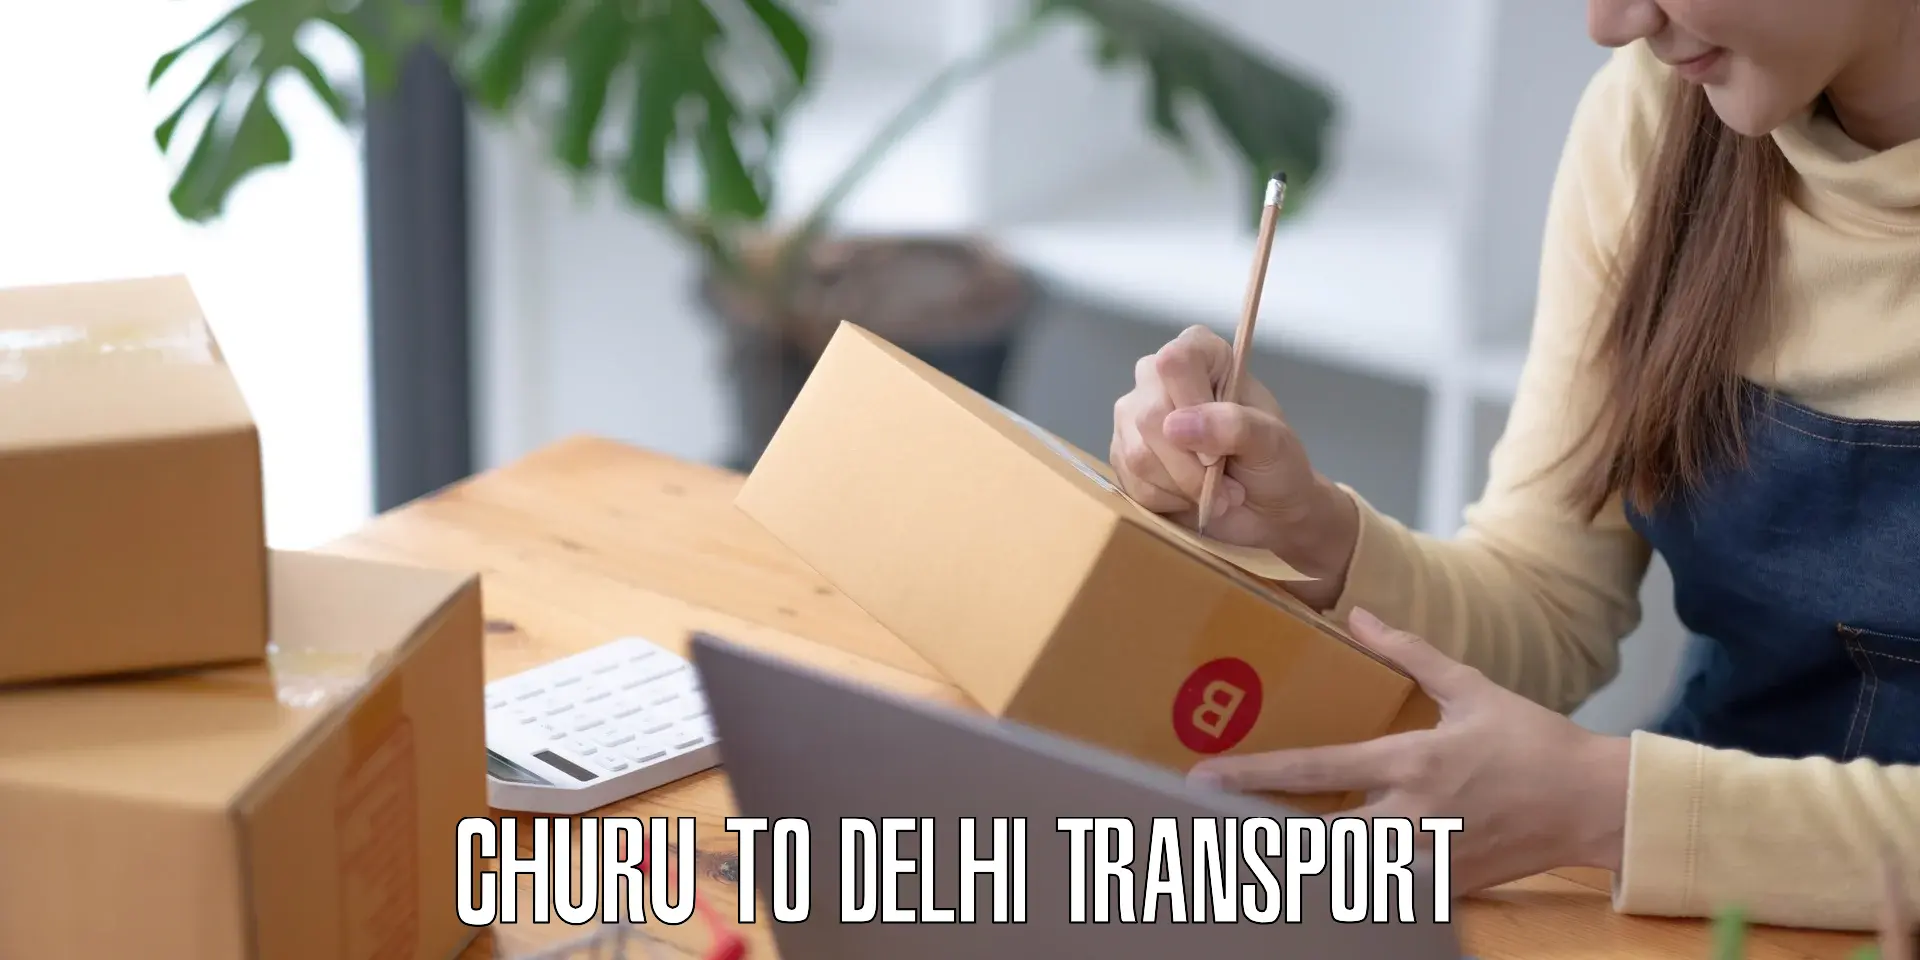 Best transport services in India Churu to NCR